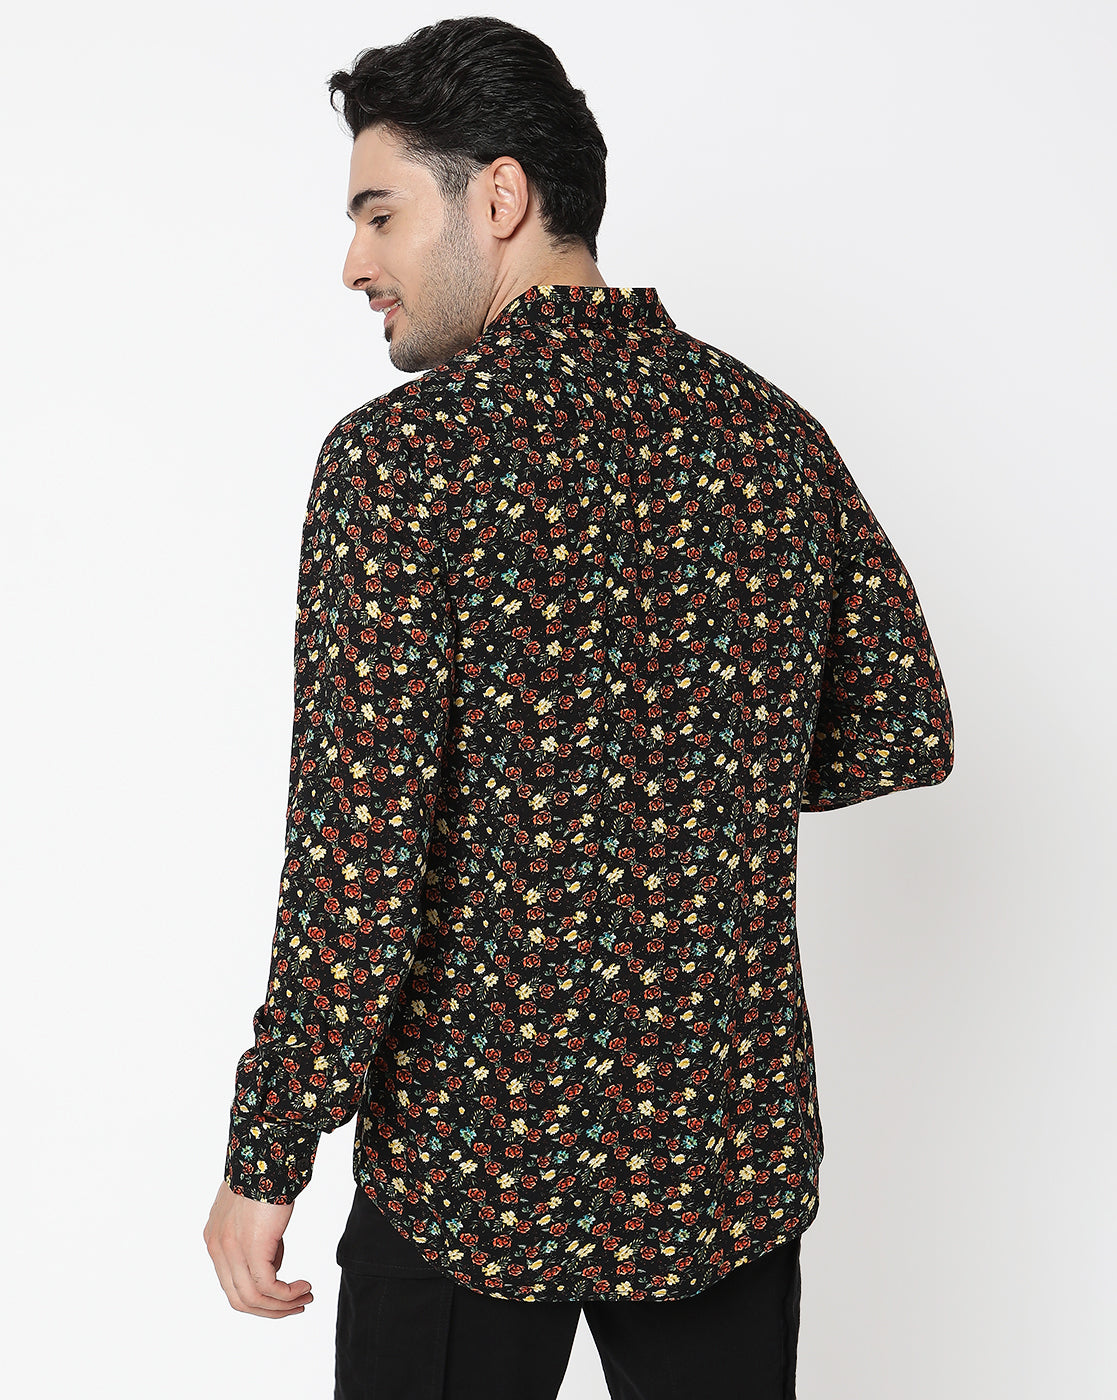 Black Based Multicolored Floral Printed Full Sleeve Rayon Shirt